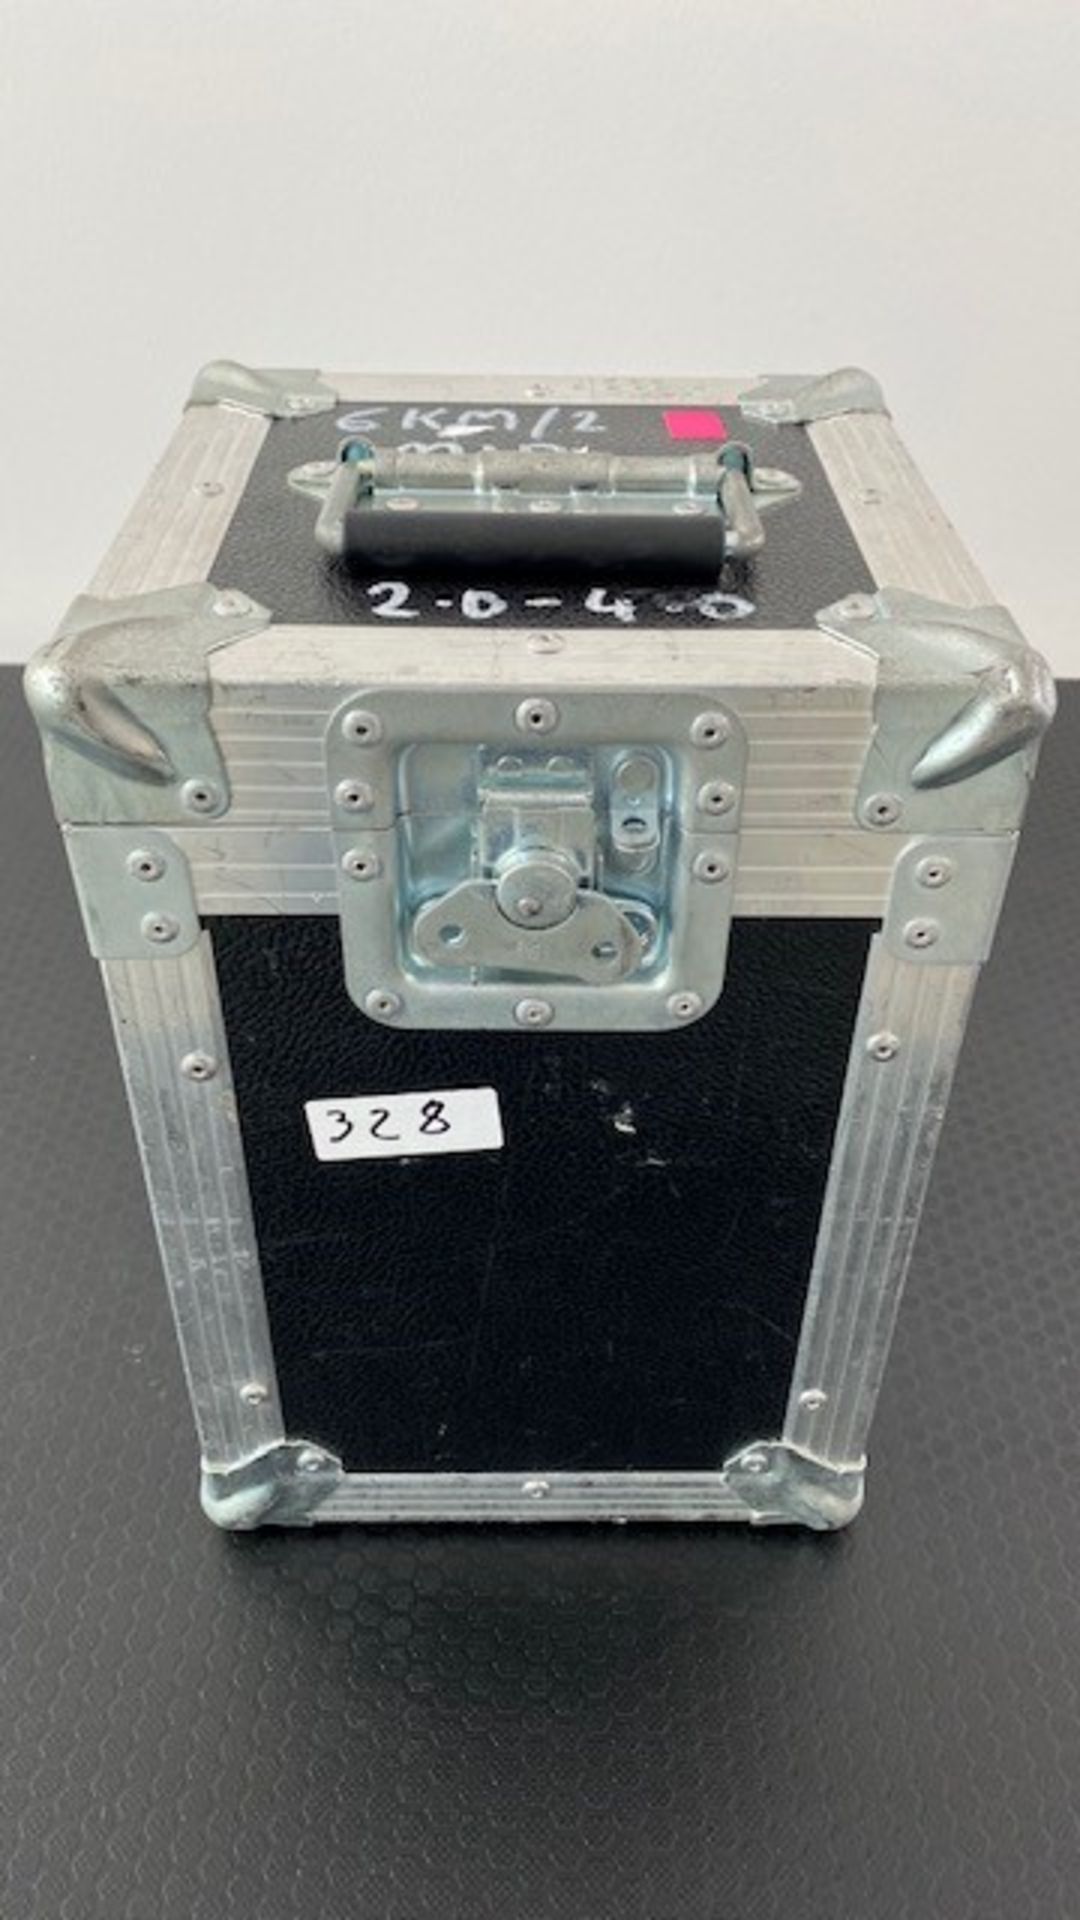 1 x Christie 2.0 - 4.0 Projector Lense Including Flight Case - Ref: 328 - CL581 - Location: - Image 3 of 3